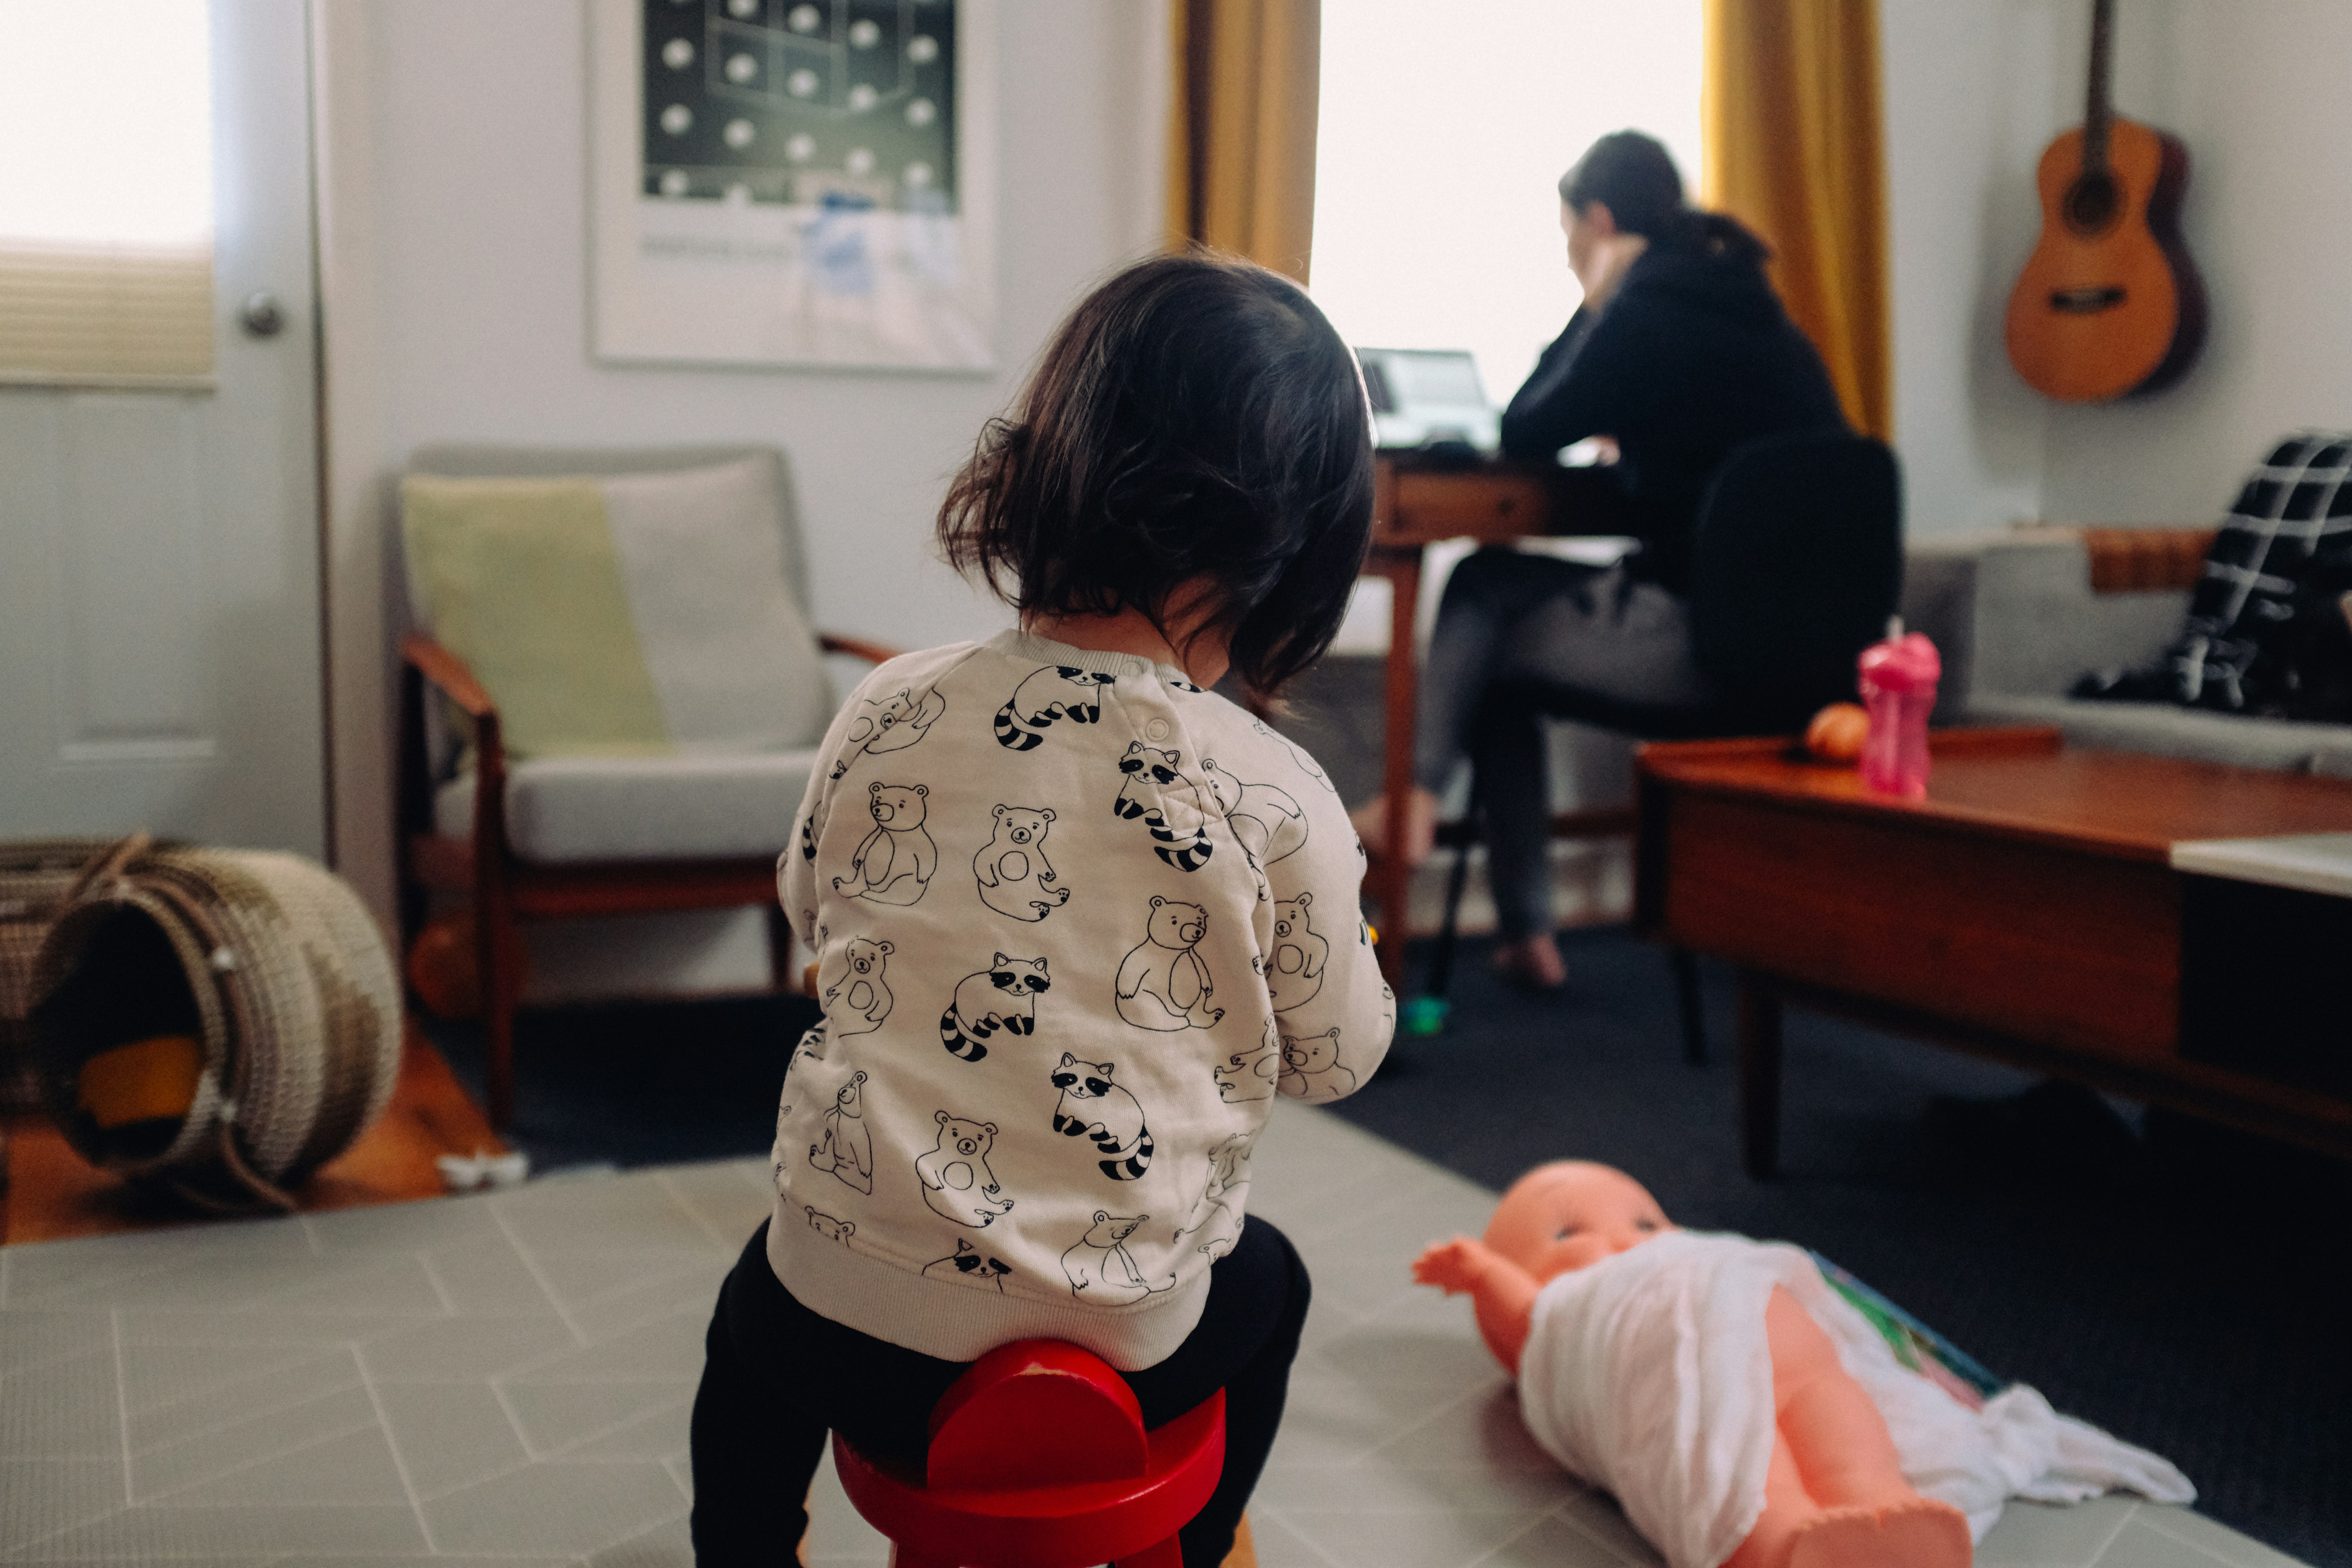 A child sits in the living room while their parent works from home